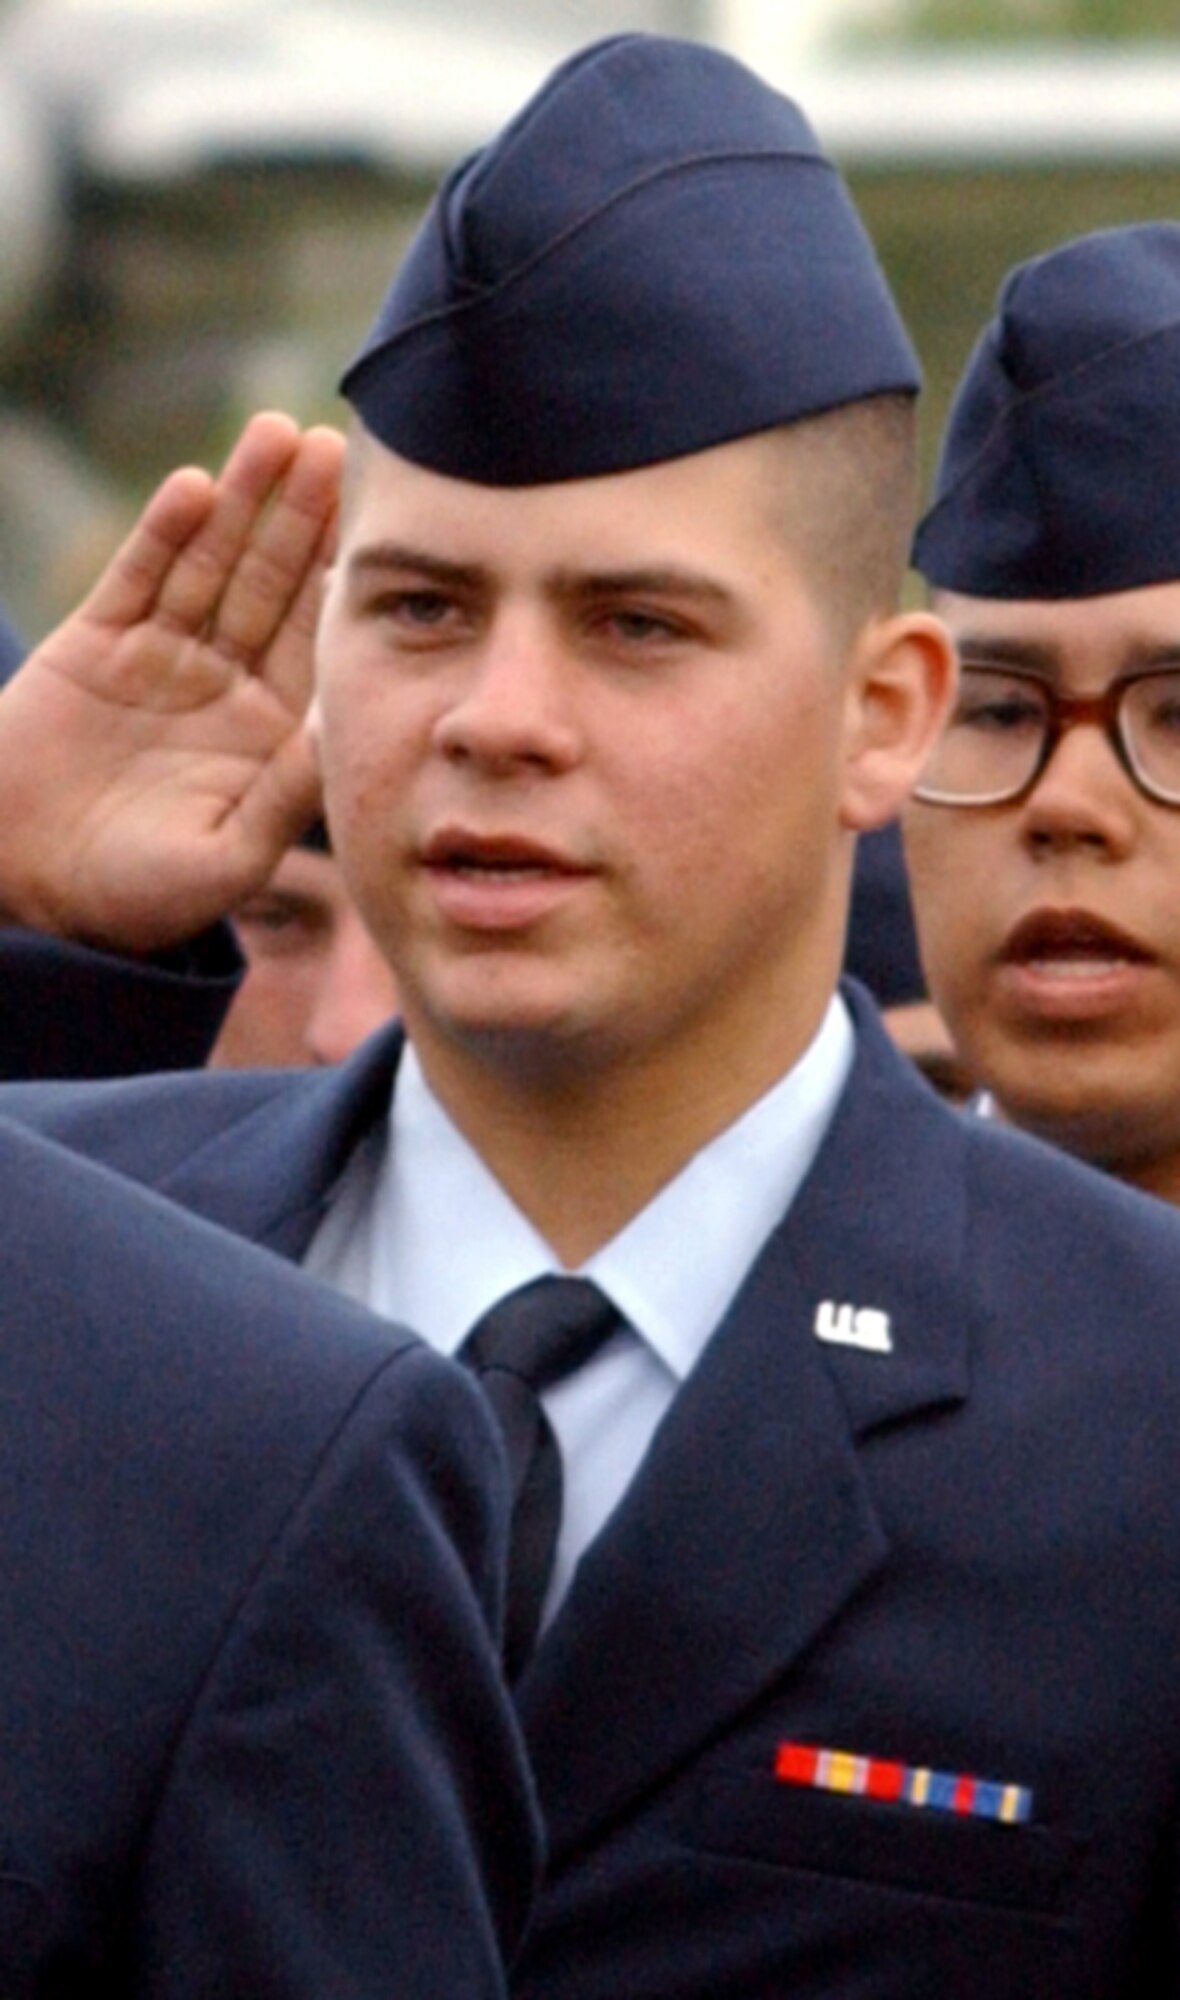 LACKLAND AIR FORCE BASE, Texas -- Airman Hector Barreto graduates from Basic Military Training here Nov. 14.  Barreto was the first person to enlist in the Air Force under the National Call to Service 15-month enlistment.  (U.S. Air Force photo by Alan Boedeker)